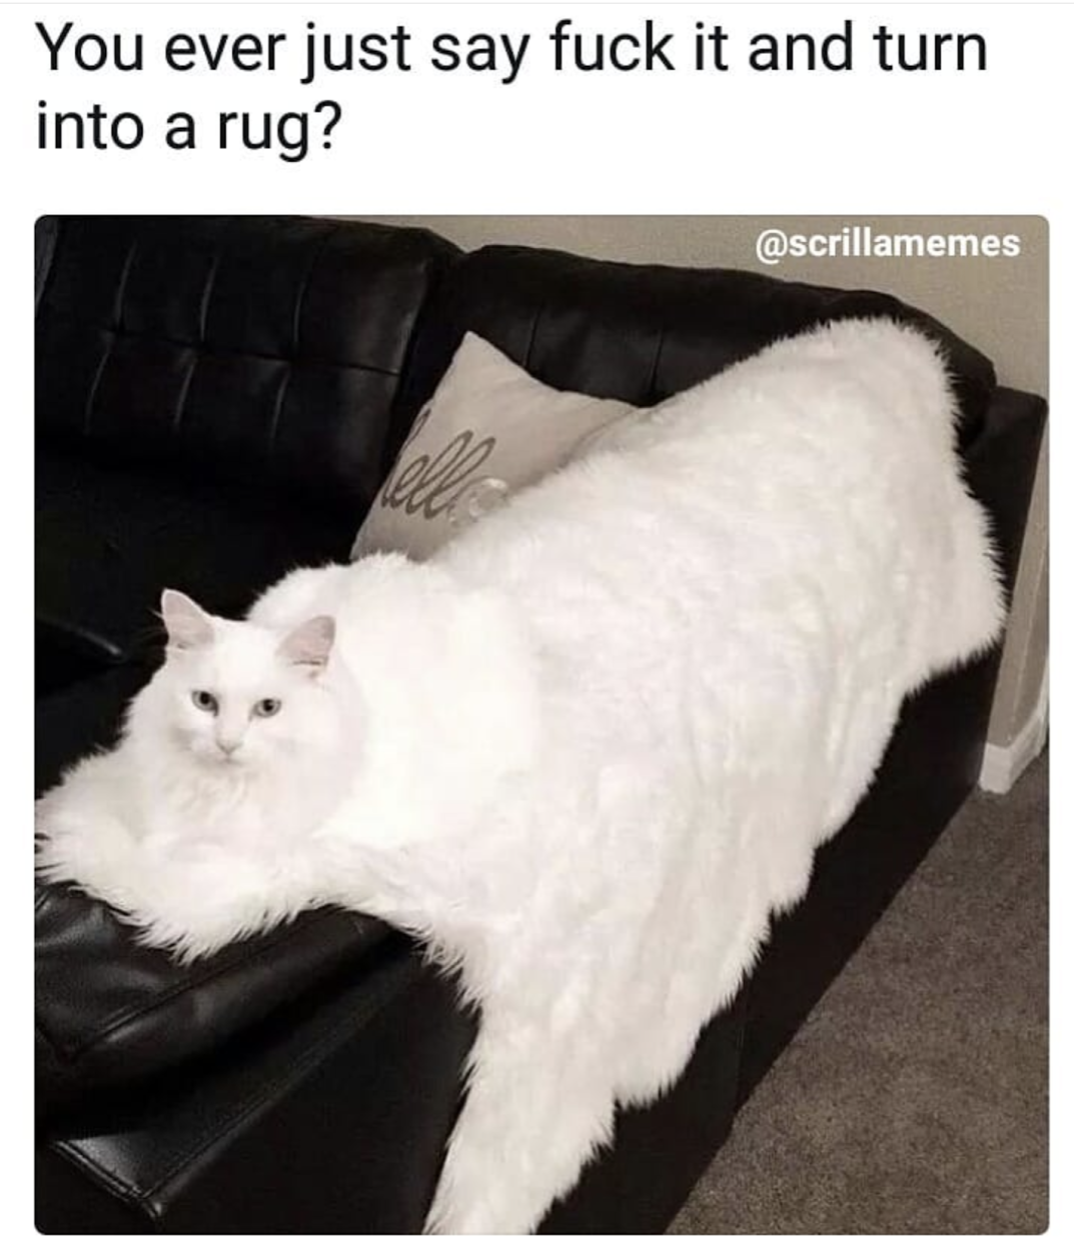 melting cat meme - You ever just say fuck it and turn into a rug?